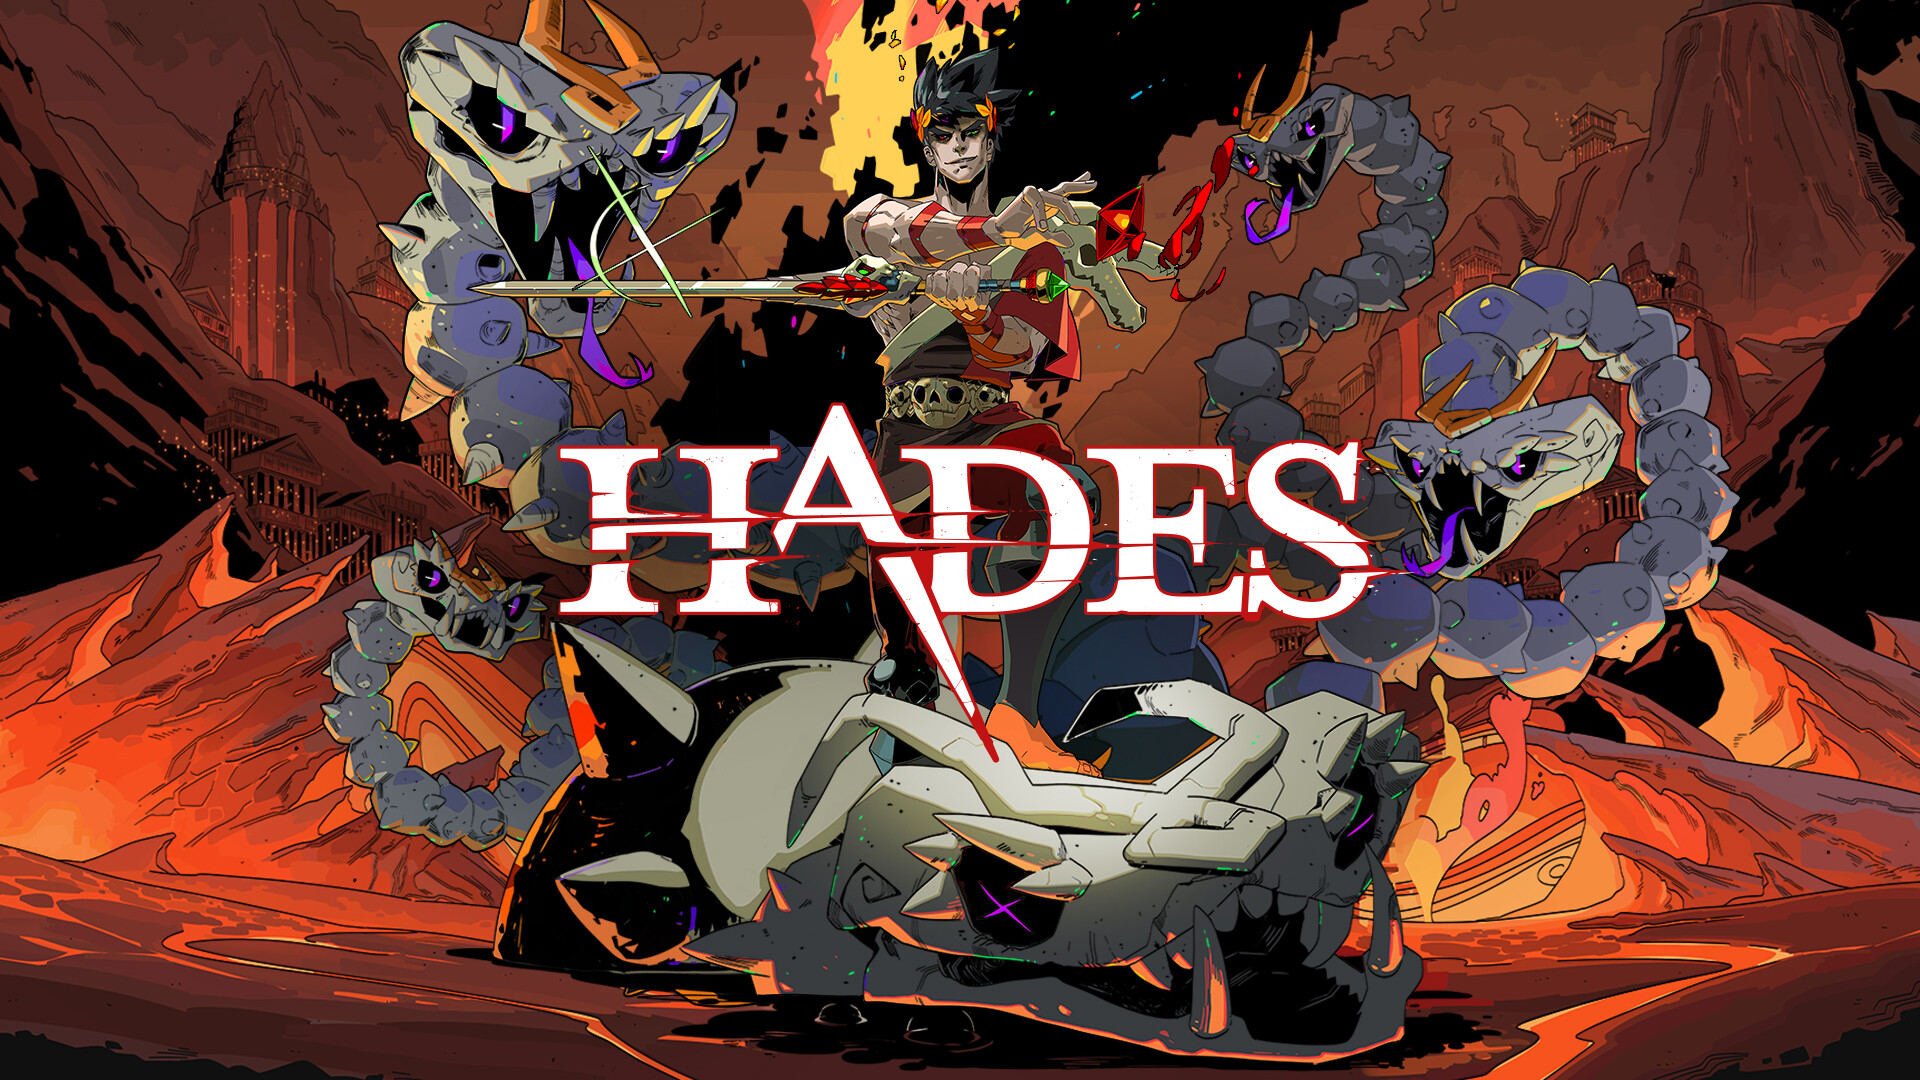 Hades: The player has the option to romance some NPCs as the plot progresses, Games, Graphics. 1920x1080 Full HD Background.